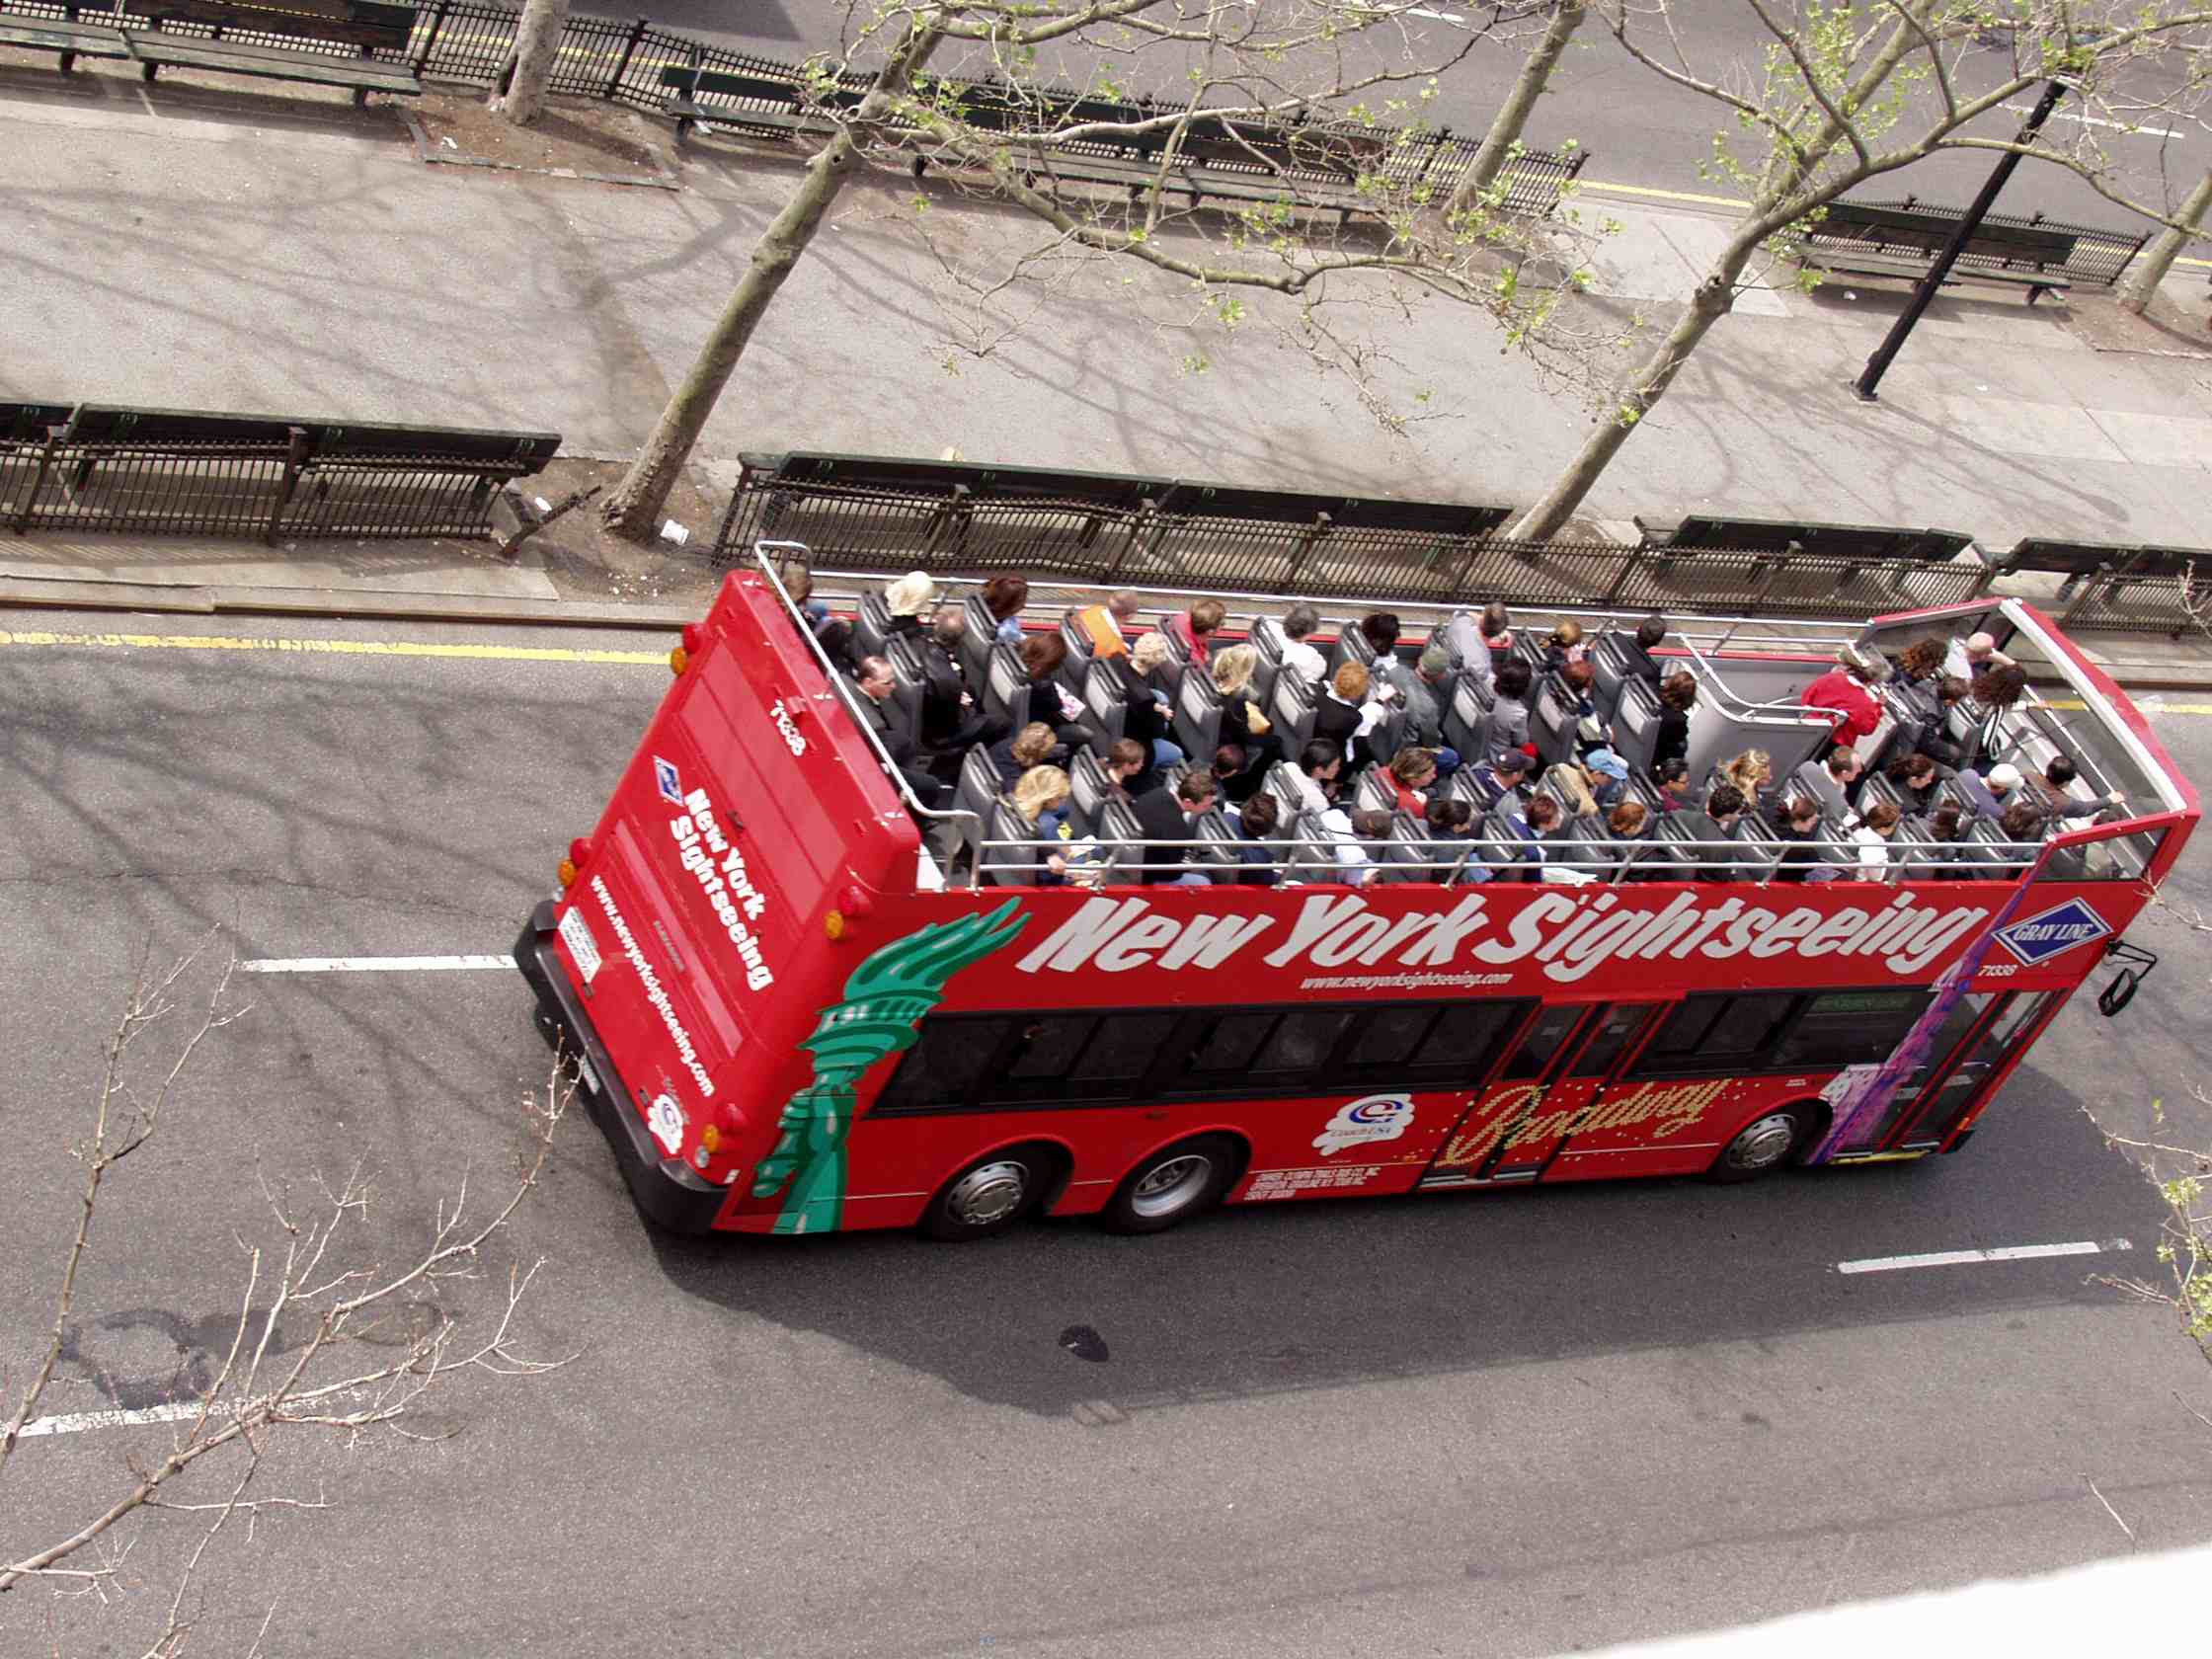 New York City double-decker sightseeing buses are popular with tourists.